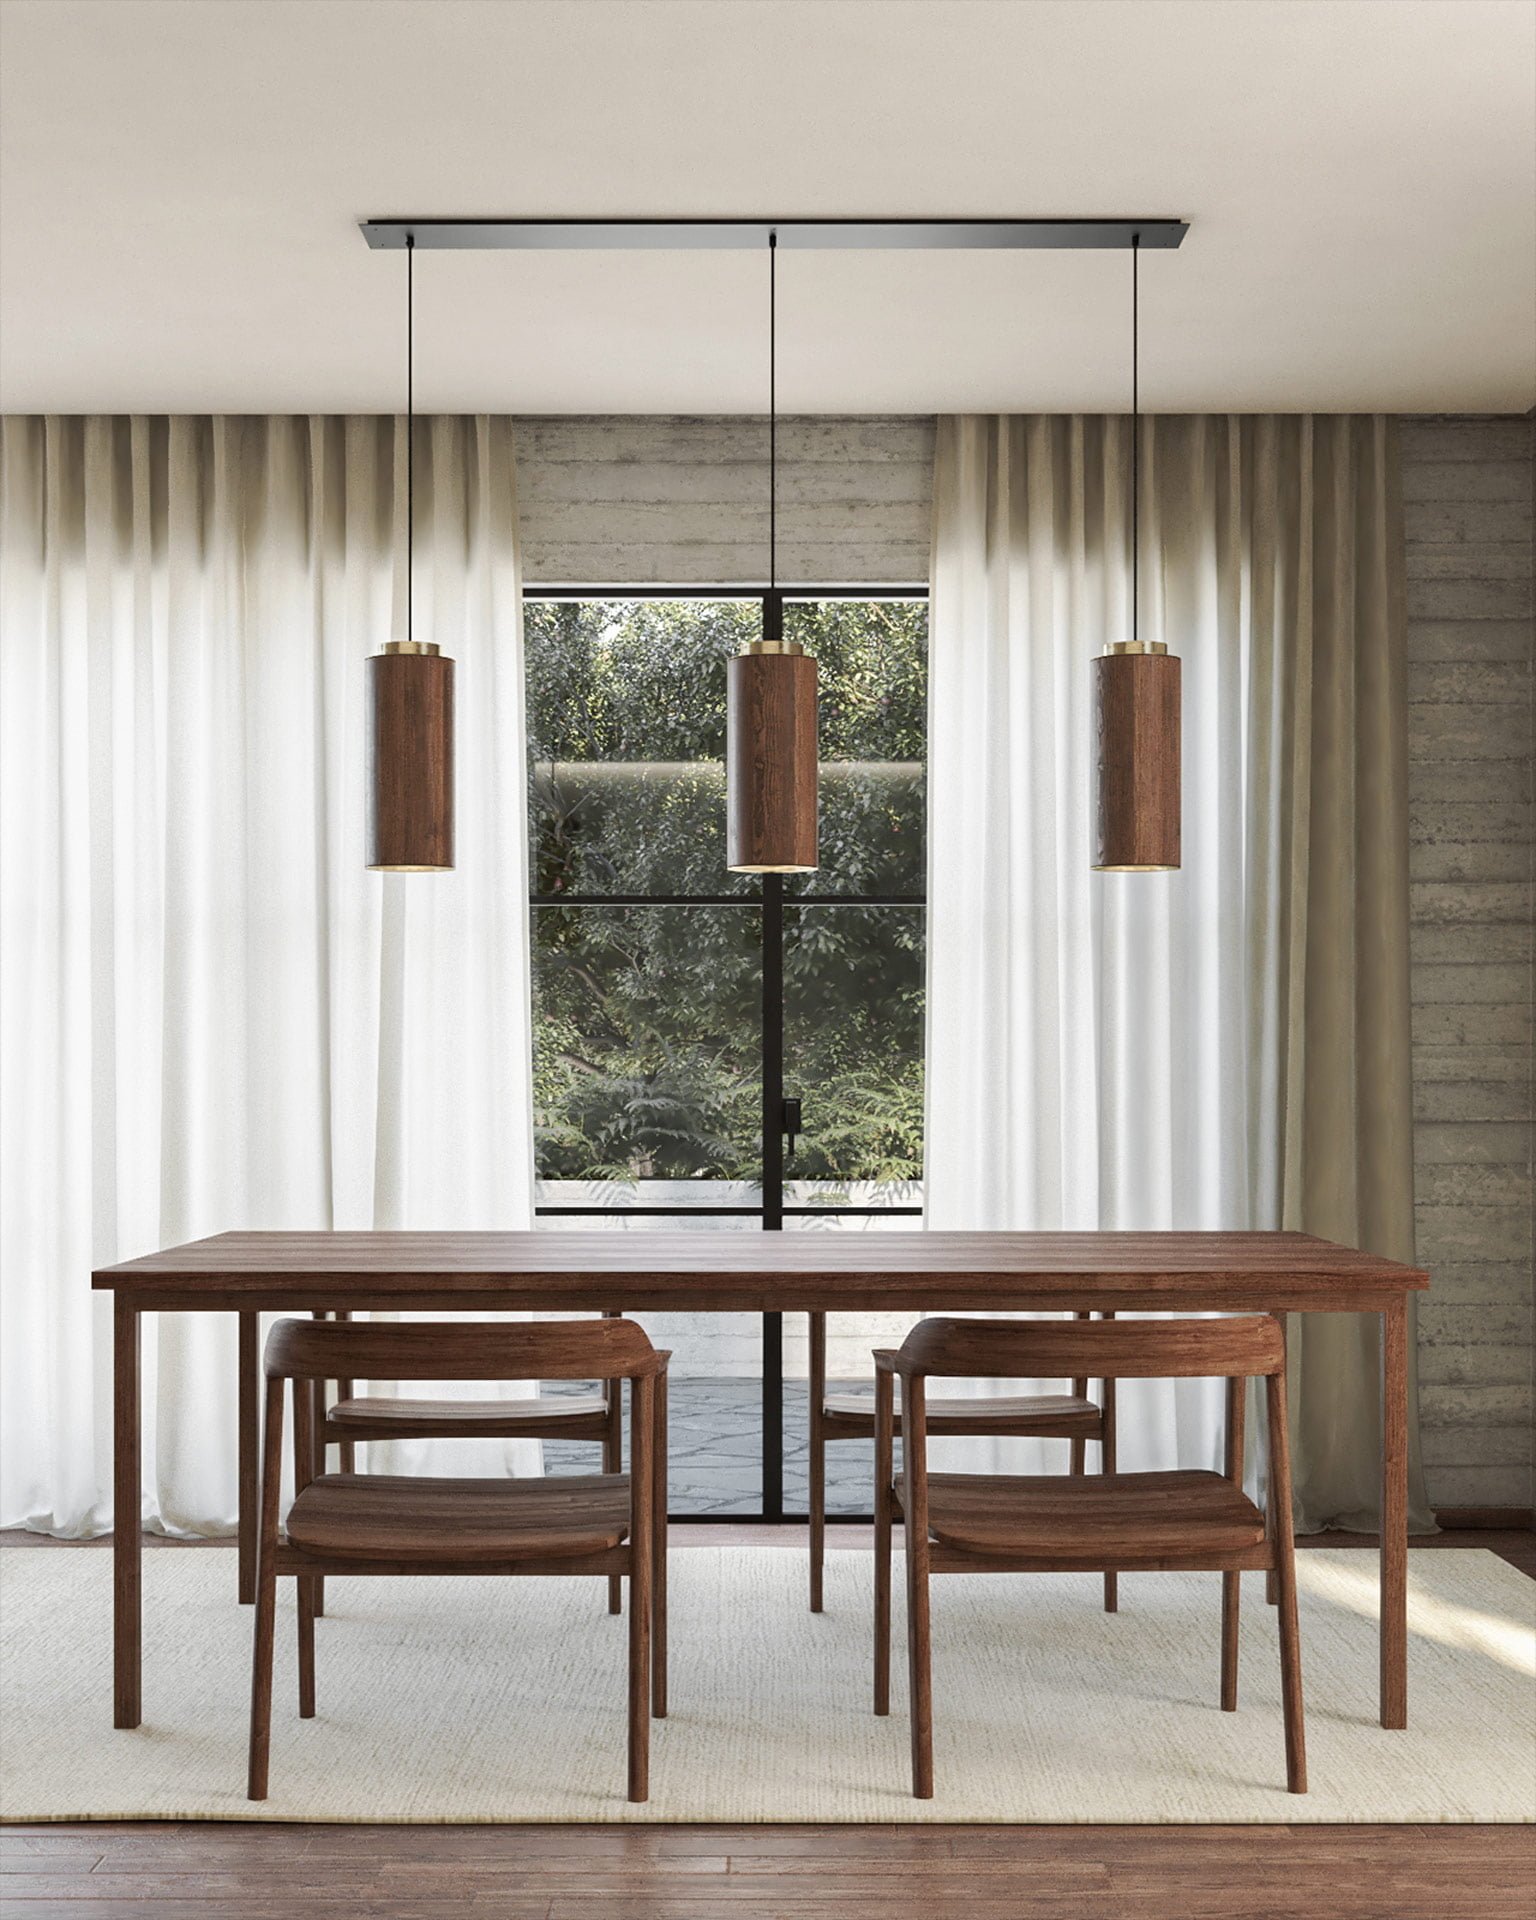 hanging ceiling lamps for dining room or kitchen designed by Bandido.